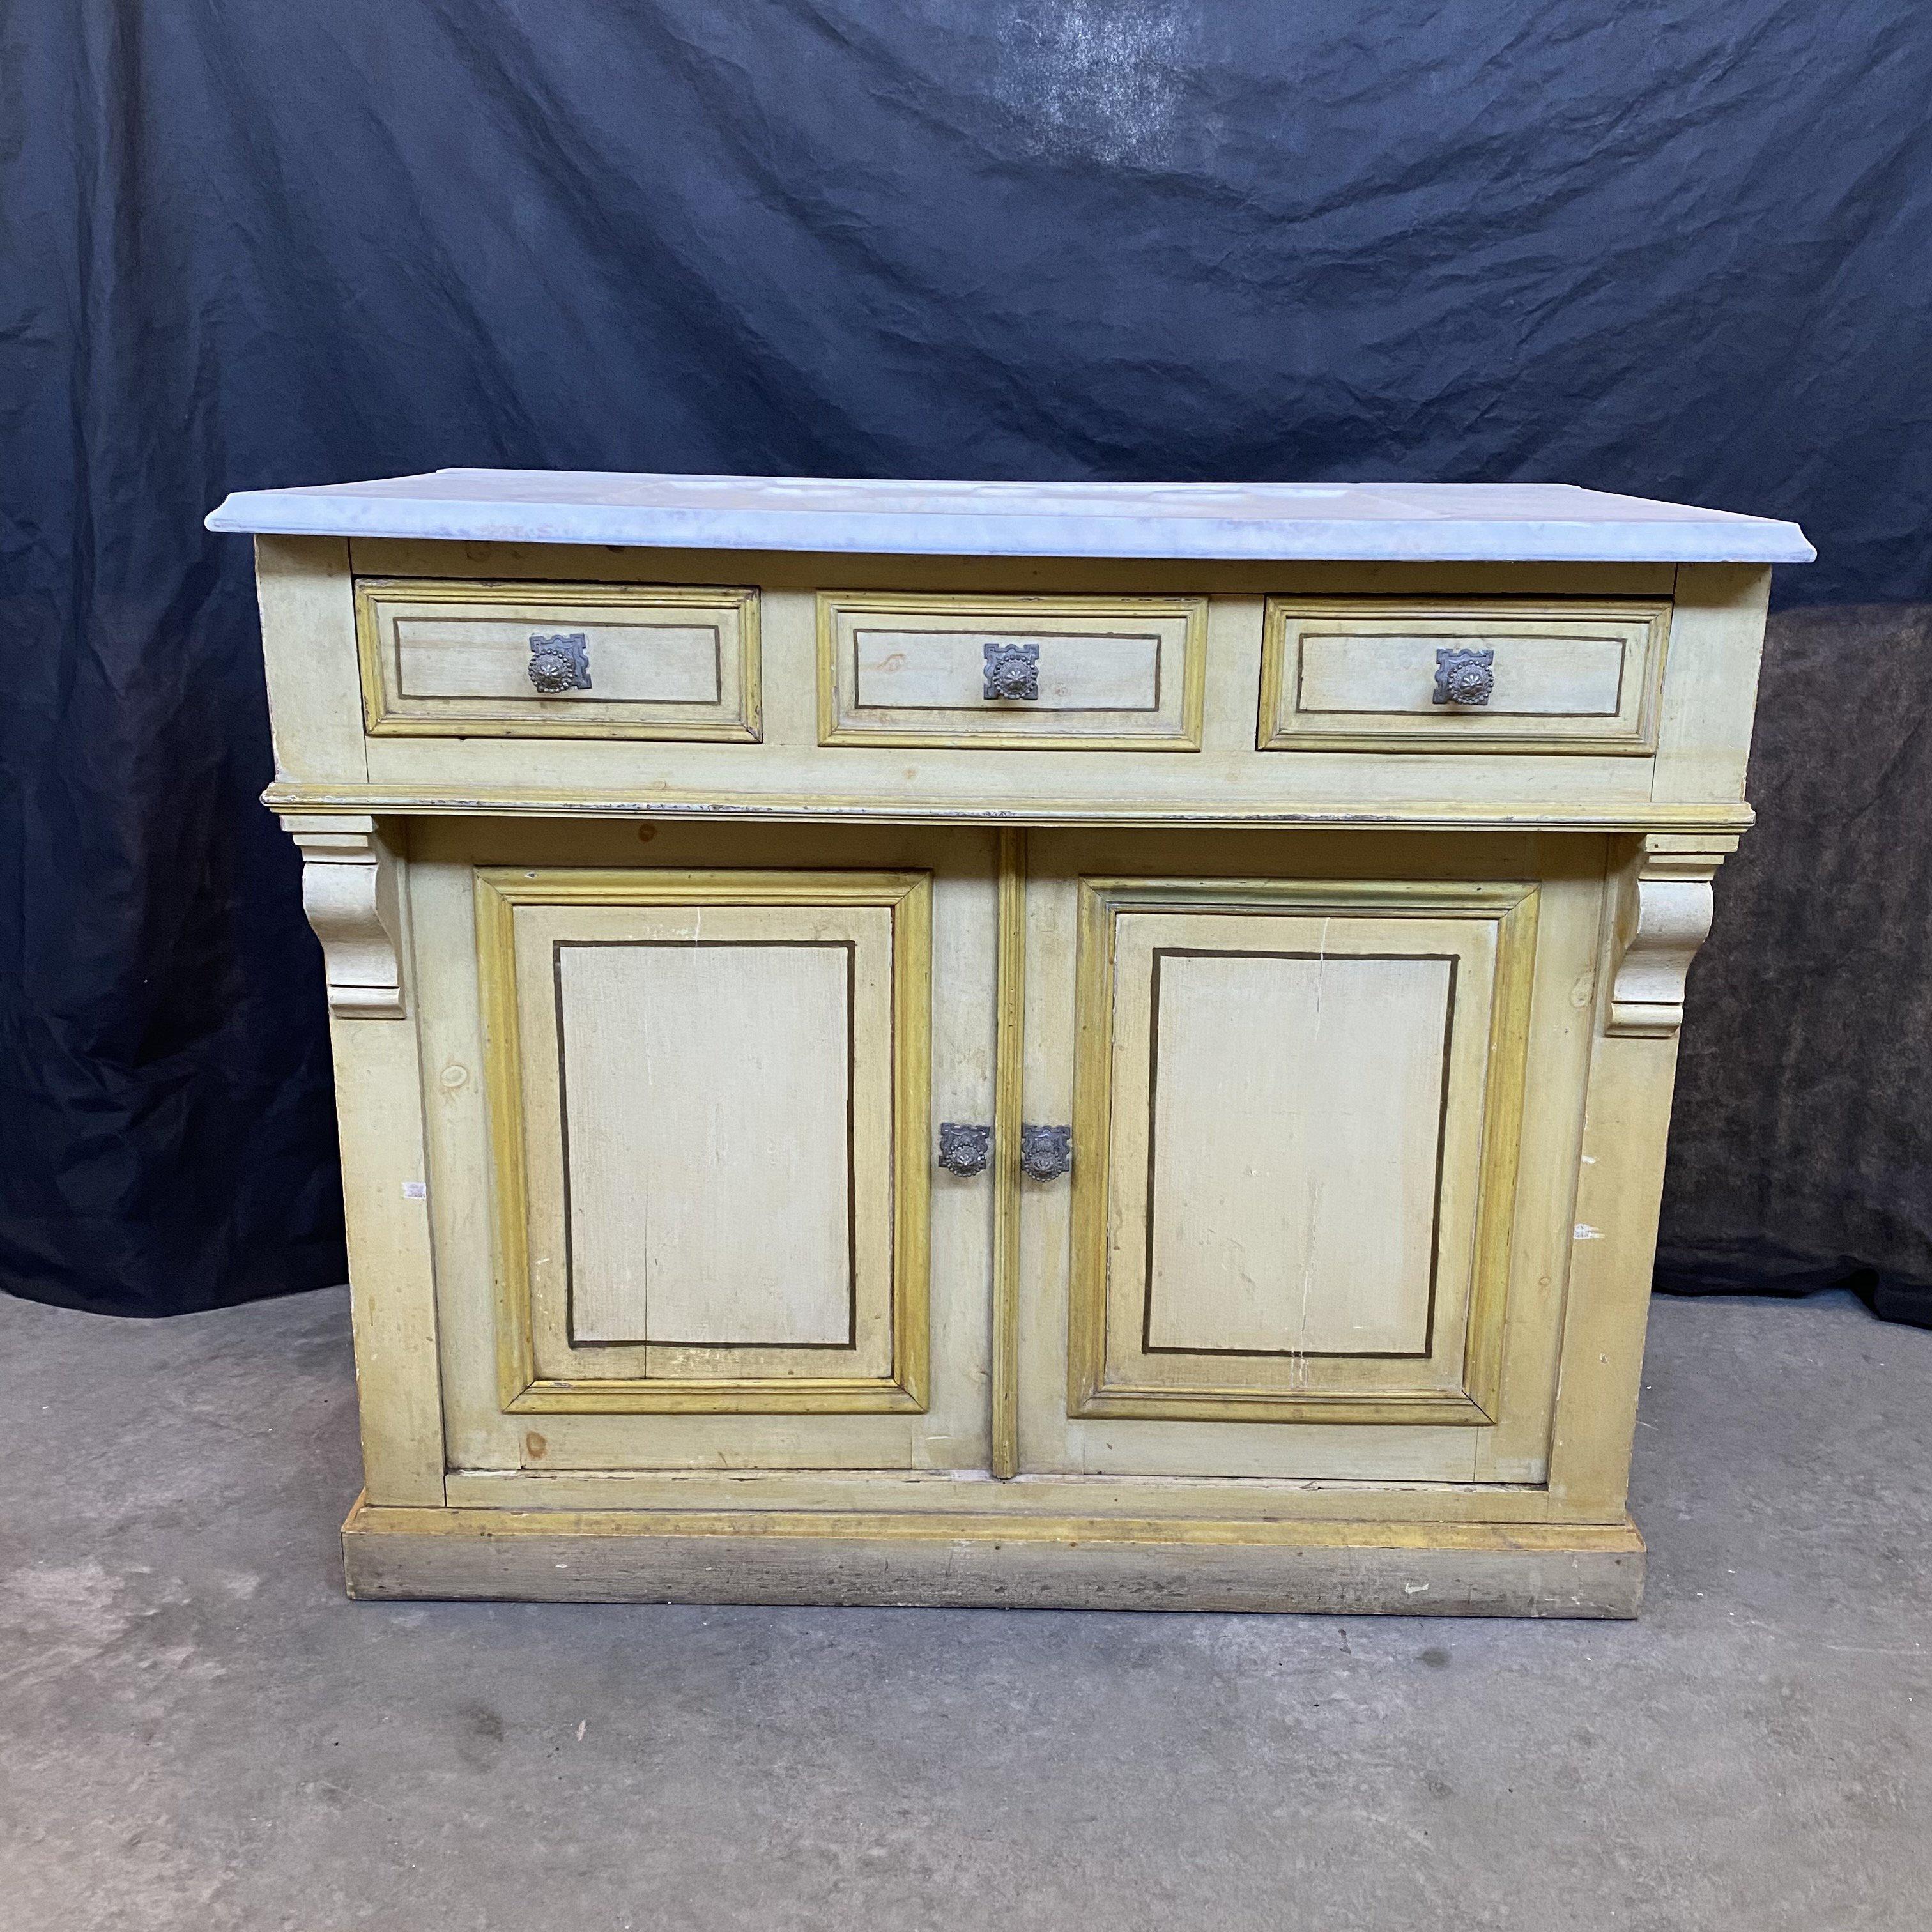 French Provincial Spectacular 19th Century French Marble Countertop Sink Cabinet For Sale